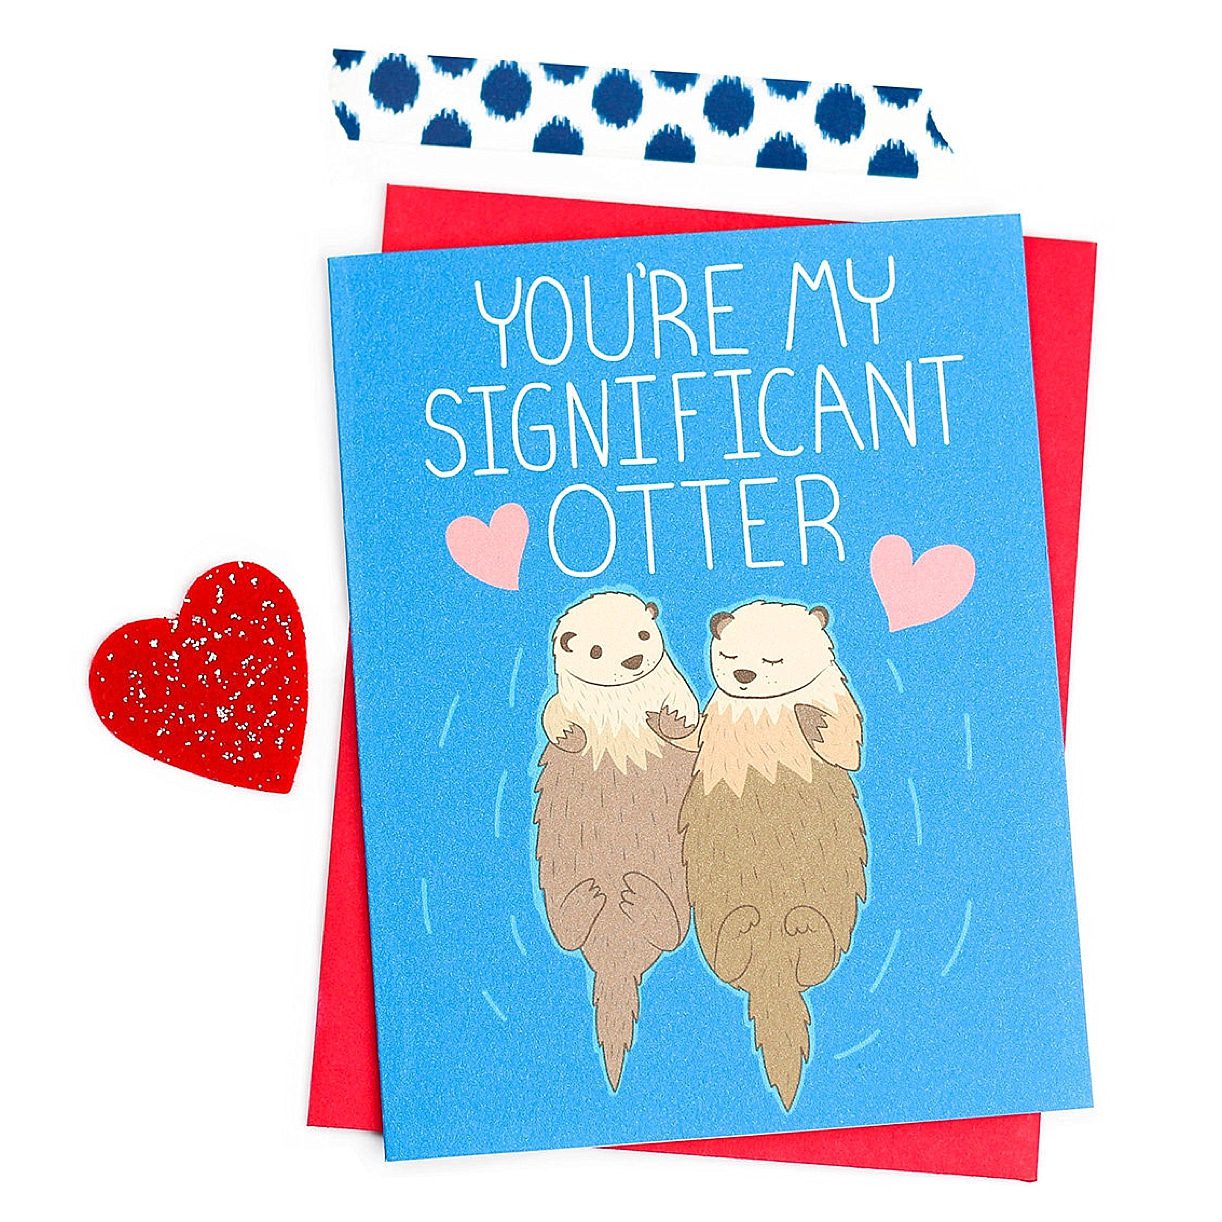 Funny Clean Valentine's Day Cards | Hill City Bride Virginia Wedding Blog